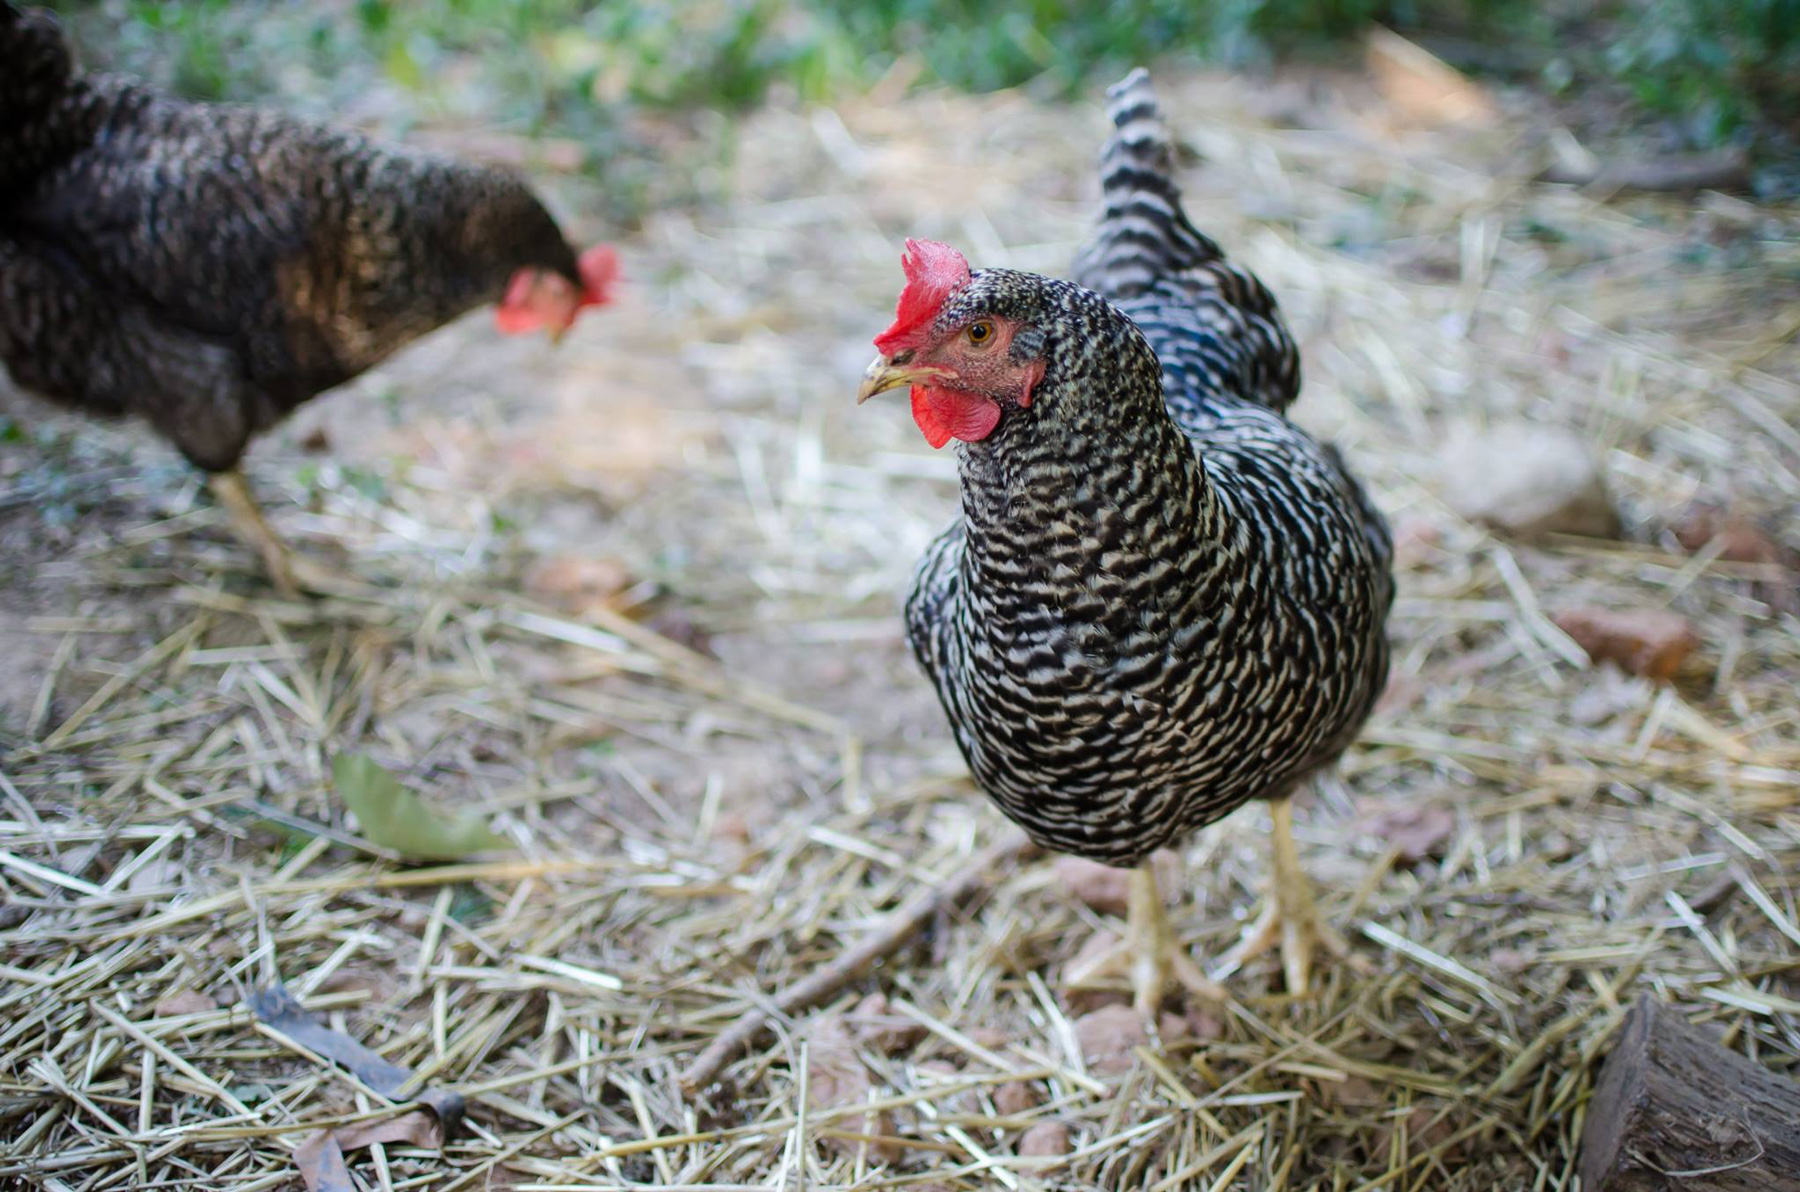 McMurray Hatchery Blog - Selecting the Best Chicken Breeds for Your Homestead - Barred Plymouth Rock